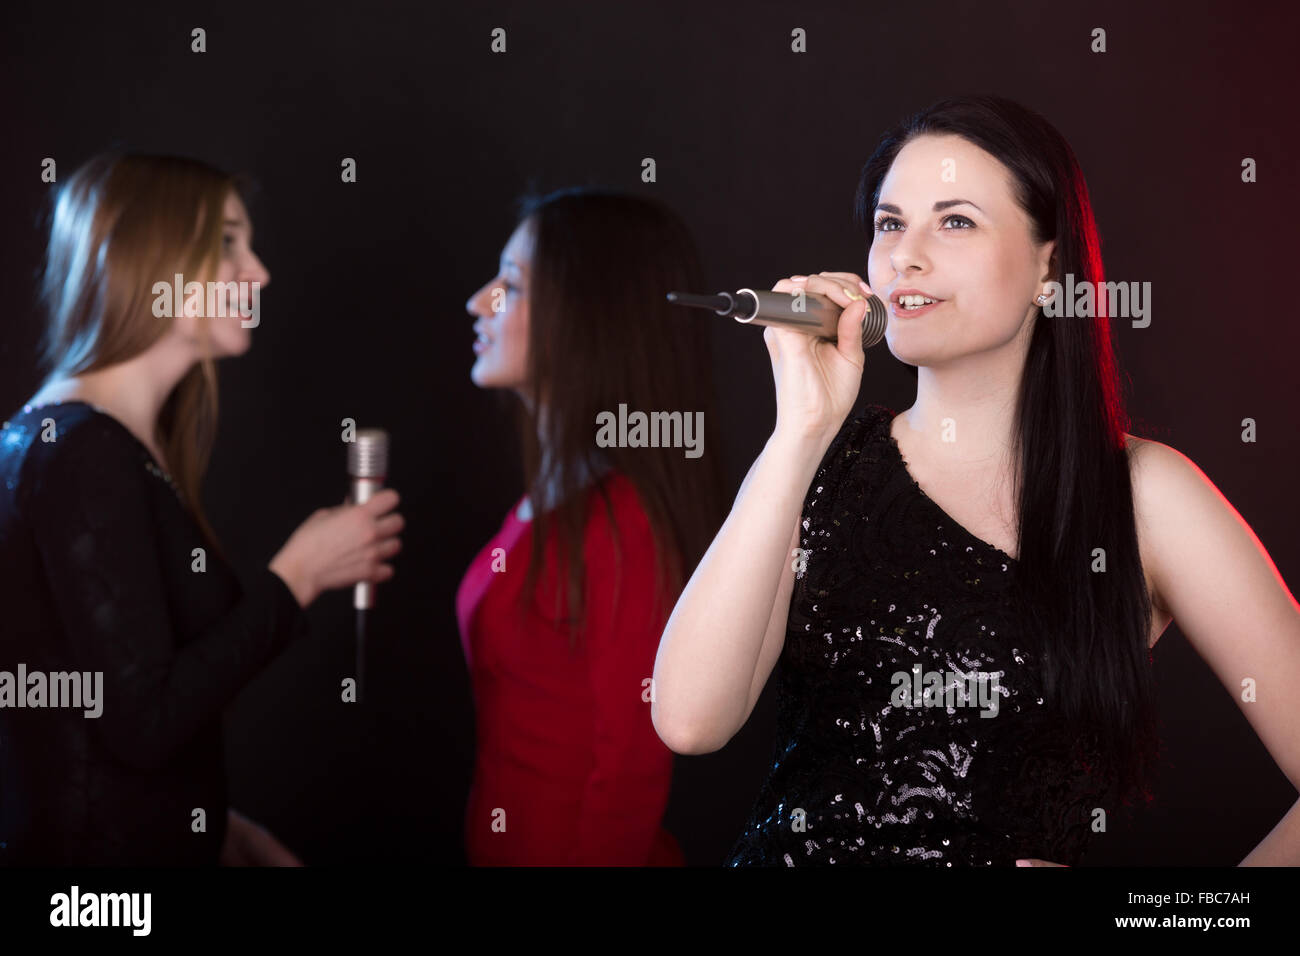 Portrait of beautiful girl singer with microphone singing lyric love song, back vocalists on the background Stock Photo